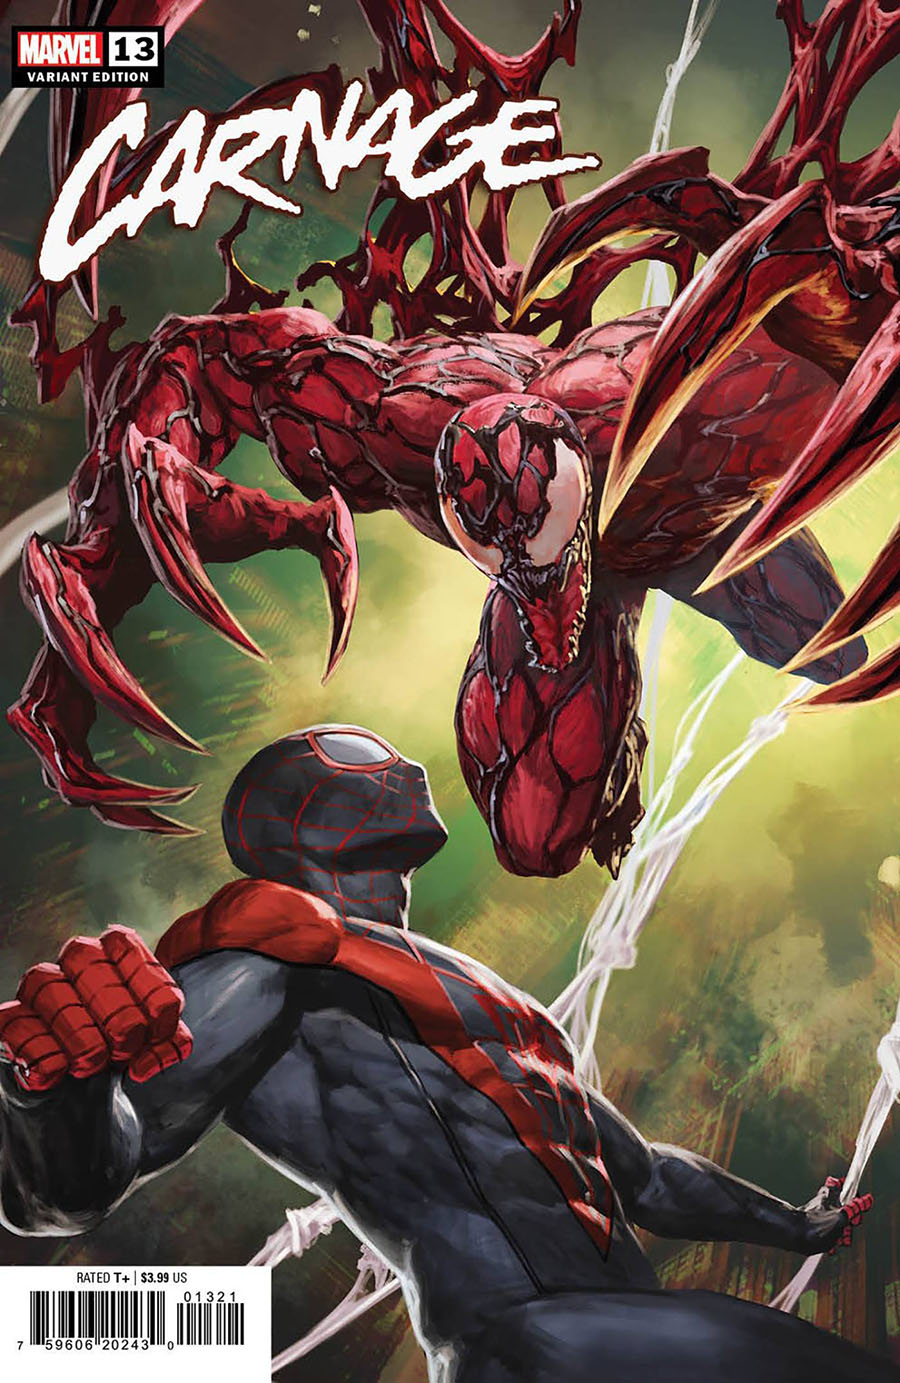 Carnage Vol 3 #13 Cover D Variant Skan Cover (Carnage Reigns Part 3)